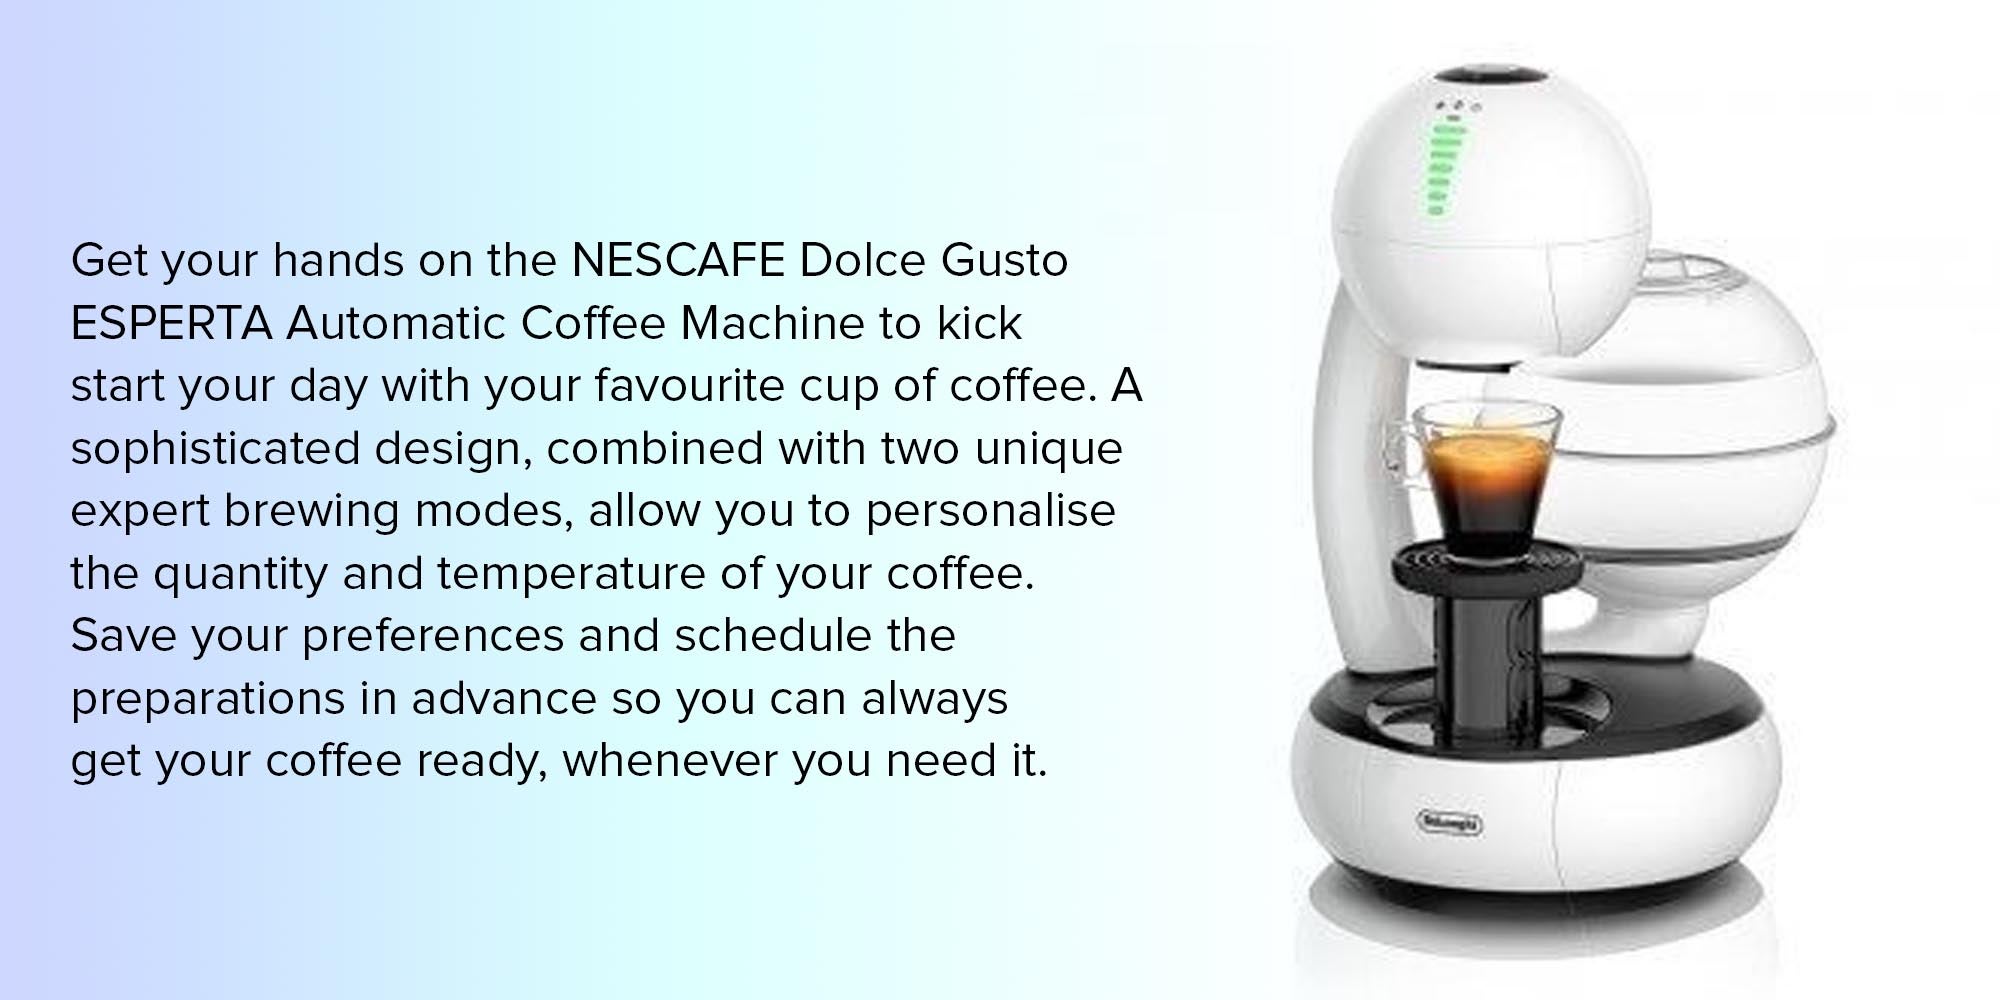 N30544631A 2 Nescafe &Lt;A Href=&Quot;Https://Lablaab.com/Wp-Content/Uploads/2020/12/File-1569226923.Pdf&Quot;&Gt;Esperta User Manual&Lt;/A&Gt; Esperta Features A 1.4L Extra-Large Water Tank And Measures 214 (W) X 364 (H) X 266 (D) &Lt;Table Border=&Quot;0&Quot; Width=&Quot;100%&Quot; Cellspacing=&Quot;0&Quot; Cellpadding=&Quot;0&Quot;&Gt; &Lt;Tbody&Gt; &Lt;Tr&Gt; &Lt;Td Valign=&Quot;Top&Quot; Width=&Quot;96&Quot;&Gt;&Lt;Img Src=&Quot;Https://Www.dolcegusto-Me.com/Ae/Media/Wysiwyg/Esperta-Pictos/Aa_Picto_Expresso_Boost.jpg&Quot; Width=&Quot;96&Quot; Border=&Quot;0&Quot; /&Gt;&Lt;/Td&Gt; &Lt;Td Class=&Quot;Inner Contents&Quot; Align=&Quot;Left&Quot; Valign=&Quot;Top&Quot;&Gt;With The Espresso Boost Expert Preparation Mode, You Can Enjoy More Intense Espressos Just At A Touch Of A Button.&Lt;/Td&Gt; &Lt;/Tr&Gt; &Lt;Tr&Gt; &Lt;Td Valign=&Quot;Top&Quot; Width=&Quot;96&Quot;&Gt;&Lt;Img Src=&Quot;Https://Www.dolcegusto-Me.com/Ae/Media/Wysiwyg/Esperta-Pictos/Aa_Picto_Delicate_Brew.jpg&Quot; Width=&Quot;96&Quot; Border=&Quot;0&Quot; /&Gt;&Lt;/Td&Gt; &Lt;Td Class=&Quot;Inner Contents&Quot; Align=&Quot;Left&Quot; Valign=&Quot;Top&Quot;&Gt;With The Delicate Brew Expert Preparation Mode, You Can Taste More Balanced And Aromatic Grandes Or Lungos Just At The Touch Of A Button.&Lt;/Td&Gt; &Lt;/Tr&Gt; &Lt;Tr&Gt; &Lt;Td Valign=&Quot;Top&Quot; Width=&Quot;96&Quot;&Gt;&Lt;Img Src=&Quot;Https://Www.dolcegusto-Me.com/Ae/Media/Wysiwyg/Esperta-Pictos/Picto_Bluetooth.jpg&Quot; Width=&Quot;96&Quot; Border=&Quot;0&Quot; /&Gt;&Lt;/Td&Gt; &Lt;Td Class=&Quot;Inner Contents&Quot; Align=&Quot;Left&Quot; Valign=&Quot;Top&Quot;&Gt;Fully Customize Your Coffee With The Nescafé&Lt;Sup&Gt;®&Lt;/Sup&Gt; Dolce Gusto&Lt;Sup&Gt;®&Lt;/Sup&Gt; App Connected Via Bluetooth To Your Machine. Select Temperature And Size Of Your Coffee, Memorize Your Preferences And Schedule Beverage Preparation In Advance. You Can Wake Up In The Morning With The Aroma Of Your Favourite Coffee Already Prepared For You!&Lt;/Td&Gt; &Lt;/Tr&Gt; &Lt;Tr&Gt; &Lt;Td Valign=&Quot;Top&Quot; Width=&Quot;96&Quot;&Gt;&Lt;Img Src=&Quot;Https://Www.dolcegusto-Me.com/Ae/Media/Wysiwyg/Esperta-Pictos/Technology_Bars_Esperta_1000X1000.Jpg&Quot; Width=&Quot;96&Quot; Border=&Quot;0&Quot; /&Gt;&Lt;/Td&Gt; &Lt;Td Class=&Quot;Inner Contents&Quot; Align=&Quot;Left&Quot; Valign=&Quot;Top&Quot;&Gt;Slide In A Capsule And Create The Perfect Coffee With A Simple Touch Of A Button. With Esperta Coffee Machine You Can Create Everything From The Smallest 30Ml Ristretto To Our Largest Xl Coffee.&Lt;/Td&Gt; &Lt;/Tr&Gt; &Lt;Tr&Gt; &Lt;Td Valign=&Quot;Top&Quot; Width=&Quot;96&Quot;&Gt;&Lt;Img Src=&Quot;Https://Www.dolcegusto-Me.com/Ae/Media/Wysiwyg/Esperta-Pictos/Technology_Joystick_Esperta_1000X1000.Jpg&Quot; Width=&Quot;96&Quot; Border=&Quot;0&Quot; /&Gt;&Lt;/Td&Gt; &Lt;Td Class=&Quot;Inner Contents&Quot; Align=&Quot;Left&Quot; Valign=&Quot;Top&Quot;&Gt;Easily Activate The Espresso Boost And Delicate Brew Unique Extraction Modes From The Machine Directly&Lt;/Td&Gt; &Lt;/Tr&Gt; &Lt;Tr&Gt; &Lt;Td Valign=&Quot;Top&Quot; Width=&Quot;96&Quot;&Gt;&Lt;Img Src=&Quot;Https://Www.dolcegusto-Me.com/Ae/Media/Wysiwyg/Machines/15-Bars-Pressure-Icon-3-En.jpg&Quot; Width=&Quot;96&Quot; Border=&Quot;0&Quot; /&Gt;&Lt;/Td&Gt; &Lt;Td Class=&Quot;Inner Contents&Quot; Align=&Quot;Left&Quot; Valign=&Quot;Top&Quot;&Gt;With Esperta’s, Up To 15 Bar High Pressure System, You Will Enjoy A Professional Coffee With A Thick, Velvety &Lt;Em&Gt;Crema&Lt;/Em&Gt;.&Lt;/Td&Gt; &Lt;/Tr&Gt; &Lt;Tr&Gt; &Lt;Td Valign=&Quot;Top&Quot; Width=&Quot;96&Quot;&Gt;&Lt;Img Src=&Quot;Https://Www.dolcegusto-Me.com/Ae/Media/Wysiwyg/Machines/No-Messicon-4-En.jpg&Quot; Width=&Quot;96&Quot; Border=&Quot;0&Quot; /&Gt;&Lt;/Td&Gt; &Lt;Td Class=&Quot;Inner Contents&Quot; Align=&Quot;Left&Quot; Valign=&Quot;Top&Quot;&Gt;Coffee Freshness Is Preserved With Our Hermetically Sealed Capsules, For A Rich And Aromatic Cup.&Lt;/Td&Gt; &Lt;/Tr&Gt; &Lt;Tr&Gt; &Lt;Td Valign=&Quot;Top&Quot; Width=&Quot;96&Quot;&Gt;&Lt;Img Src=&Quot;Https://Www.dolcegusto-Me.com/Ae/Media/Wysiwyg/Machines/Highquality-Icon-5-En.jpg&Quot; Width=&Quot;96&Quot; Border=&Quot;0&Quot; /&Gt;&Lt;/Td&Gt; &Lt;Td Class=&Quot;Inner Contents&Quot; Align=&Quot;Left&Quot; Valign=&Quot;Top&Quot;&Gt;Take Your Pick From Over 30 High Quality Coffee Creations: Choose From Our Range Of Intense Espressos, Smooth Cappuccinos, Aromatic Grandes, Even Hot Chocolate, Teas, And Many More.&Lt;/Td&Gt; &Lt;/Tr&Gt; &Lt;Tr&Gt; &Lt;Td Valign=&Quot;Top&Quot; Width=&Quot;96&Quot;&Gt;&Lt;Img Src=&Quot;Https://Www.dolcegusto-Me.com/Ae/Media/Wysiwyg/Machines/Hot-And-Cold-Icon-6-En.jpg&Quot; Width=&Quot;96&Quot; Border=&Quot;0&Quot; /&Gt;&Lt;/Td&Gt; &Lt;Td Class=&Quot;Inner Contents&Quot; Align=&Quot;Left&Quot; Valign=&Quot;Top&Quot;&Gt;The Sophisticated Esperta Capsule Coffee Machine Can Prepare Not Only Hot, But Also Delicious Cold Beverages.&Lt;/Td&Gt; &Lt;/Tr&Gt; &Lt;Tr&Gt; &Lt;Td Valign=&Quot;Top&Quot; Width=&Quot;96&Quot;&Gt;&Lt;Img Src=&Quot;Https://Www.dolcegusto-Me.com/Ae/Media/Wysiwyg/Machines/Eco-Mode-Icon-7-En-1Min.jpg&Quot; Width=&Quot;96&Quot; Border=&Quot;0&Quot; /&Gt;&Lt;/Td&Gt; &Lt;Td Class=&Quot;Inner Contents&Quot; Align=&Quot;Left&Quot; Valign=&Quot;Top&Quot;&Gt;After 5 Minutes Of Inactivity, Eco Mode Automatically Switches Off The Machine. It’s An A Rating For Energy Consumption.&Lt;/Td&Gt; &Lt;/Tr&Gt; &Lt;Tr&Gt; &Lt;Td Valign=&Quot;Top&Quot; Width=&Quot;96&Quot;&Gt;&Lt;/Td&Gt; &Lt;Td Class=&Quot;Inner Contents&Quot; Align=&Quot;Left&Quot; Valign=&Quot;Top&Quot;&Gt;&Lt;/Td&Gt; &Lt;/Tr&Gt; &Lt;Tr&Gt; &Lt;Td Valign=&Quot;Top&Quot; Width=&Quot;96&Quot;&Gt;&Lt;Img Src=&Quot;Https://Www.dolcegusto-Me.com/Ae/Media/Wysiwyg/Esperta-Pictos/Descaling-Alert-Picto.jpg&Quot; Width=&Quot;96&Quot; Border=&Quot;0&Quot; /&Gt;&Lt;/Td&Gt; &Lt;Td Class=&Quot;Inner Contents&Quot; Align=&Quot;Left&Quot; Valign=&Quot;Top&Quot;&Gt;The Descaling Led On Your Nescafé&Lt;Sup&Gt;®&Lt;/Sup&Gt; Dolce Gusto&Lt;Sup&Gt;®&Lt;/Sup&Gt; Esperta Coffee Machine Lights Orange When It'S Time To Descale Your Machine.&Lt;/Td&Gt; &Lt;/Tr&Gt; &Lt;/Tbody&Gt; &Lt;/Table&Gt; Nescafe Dolce Gusto Coffee Machine Nescafe Dolce Gusto Coffee Machine Esperta Edg505 | Black